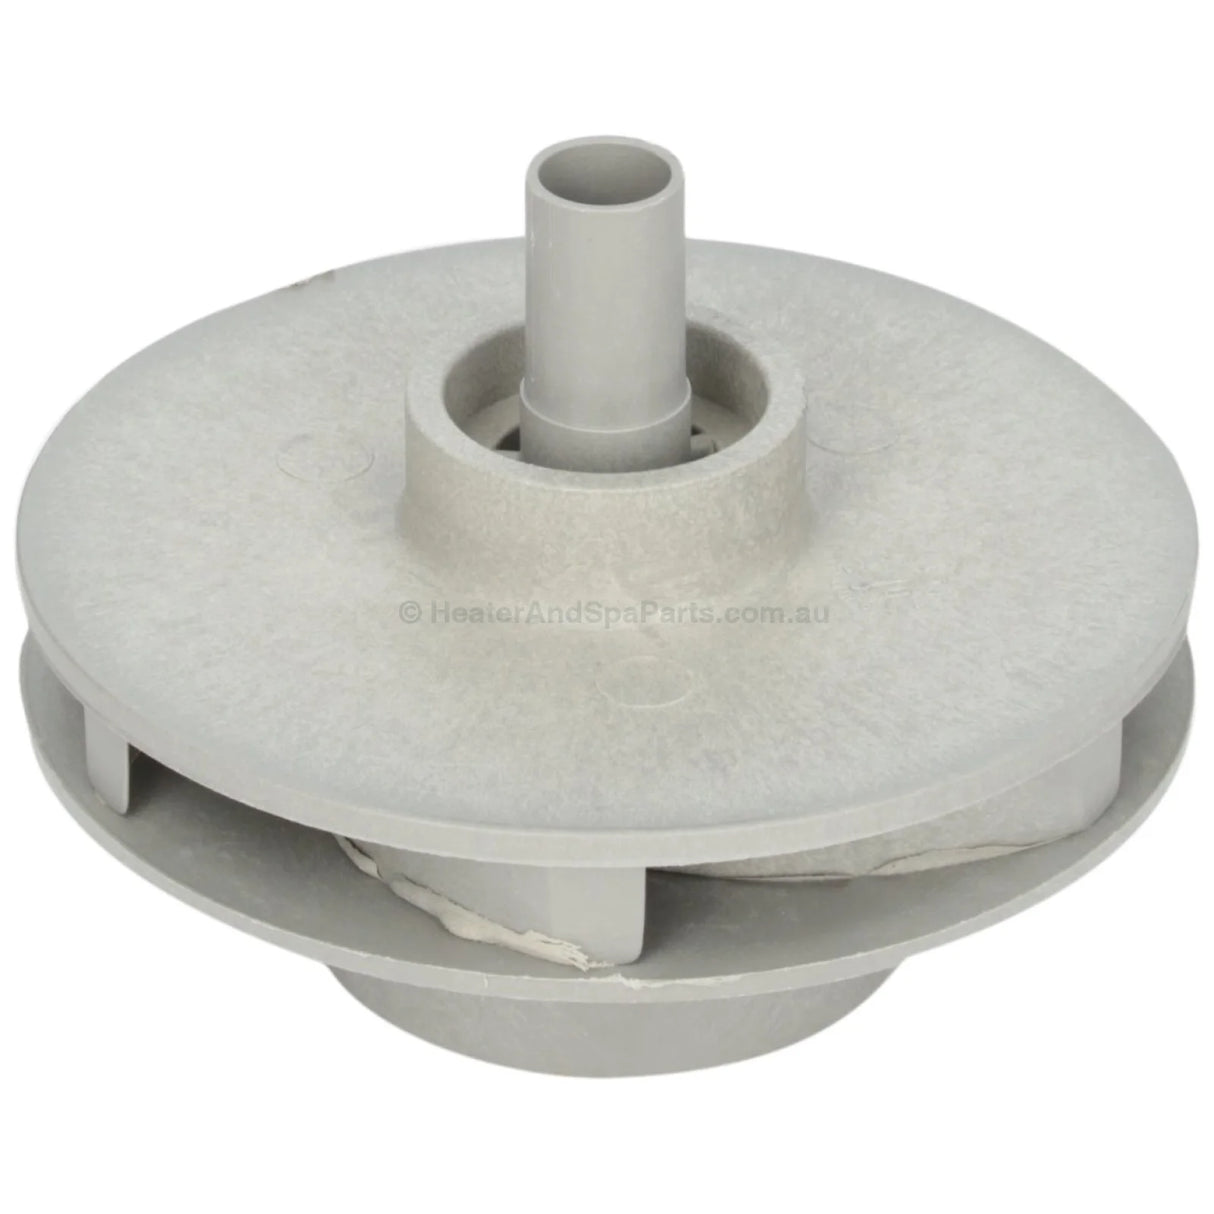 Waterway 5HP/3.5HP/2HP-2.5HP (1.5-1.8kw) Executive Pump Impeller - Heater and Spa Parts